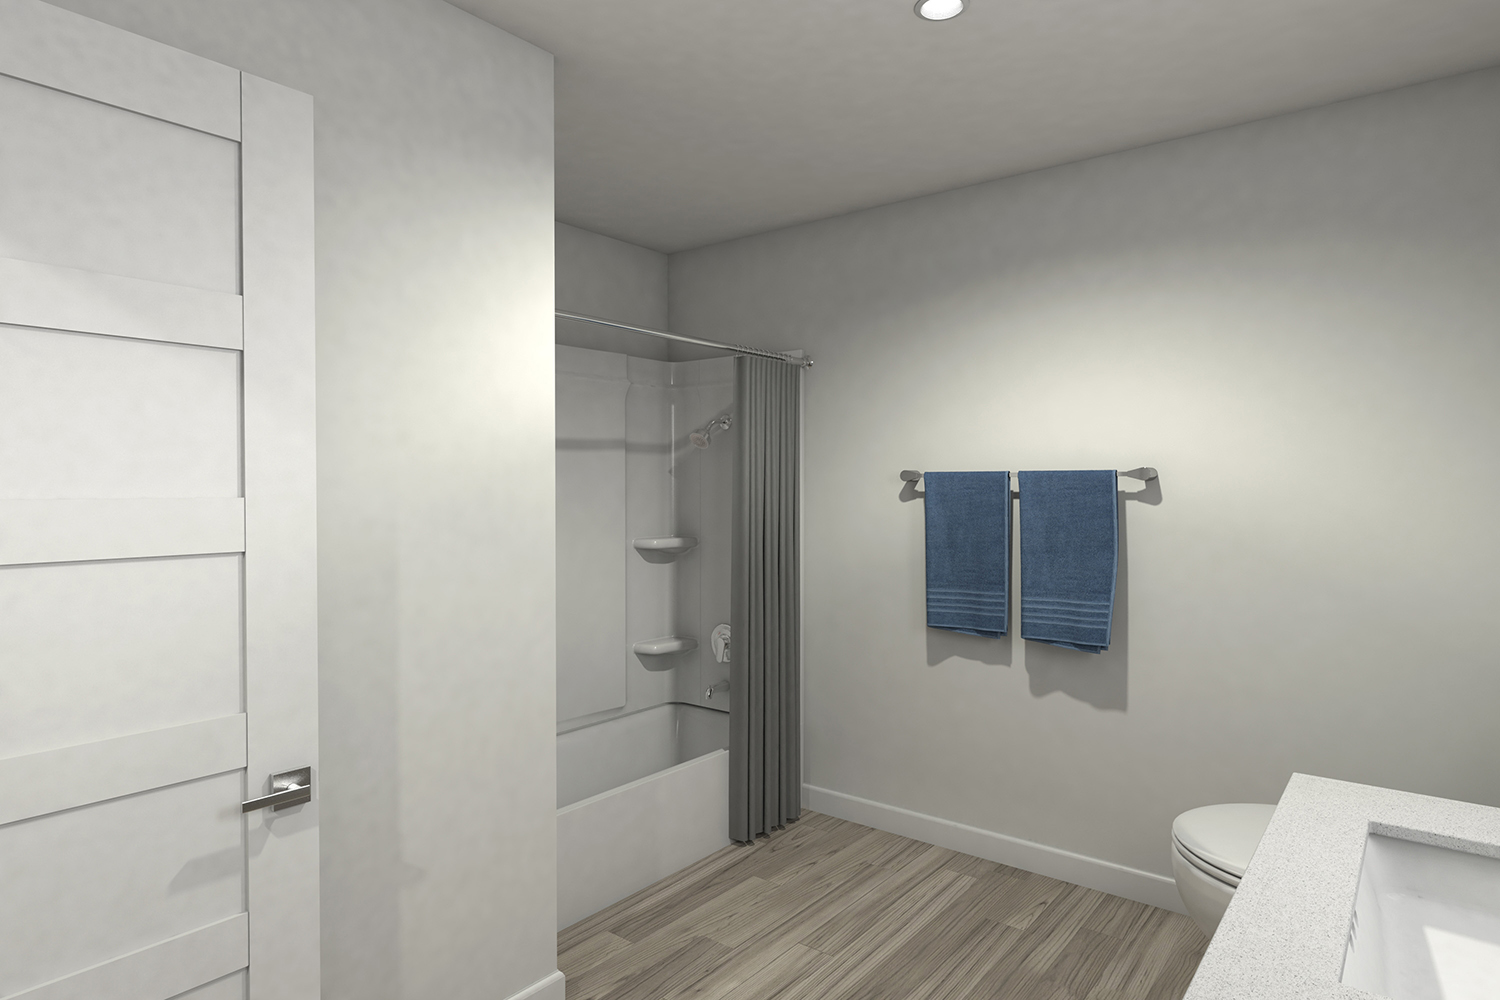 The Overlook at Keystone Canyon Apartments - Reno NV - Three Bedroom - Guest Bathroom & Shower